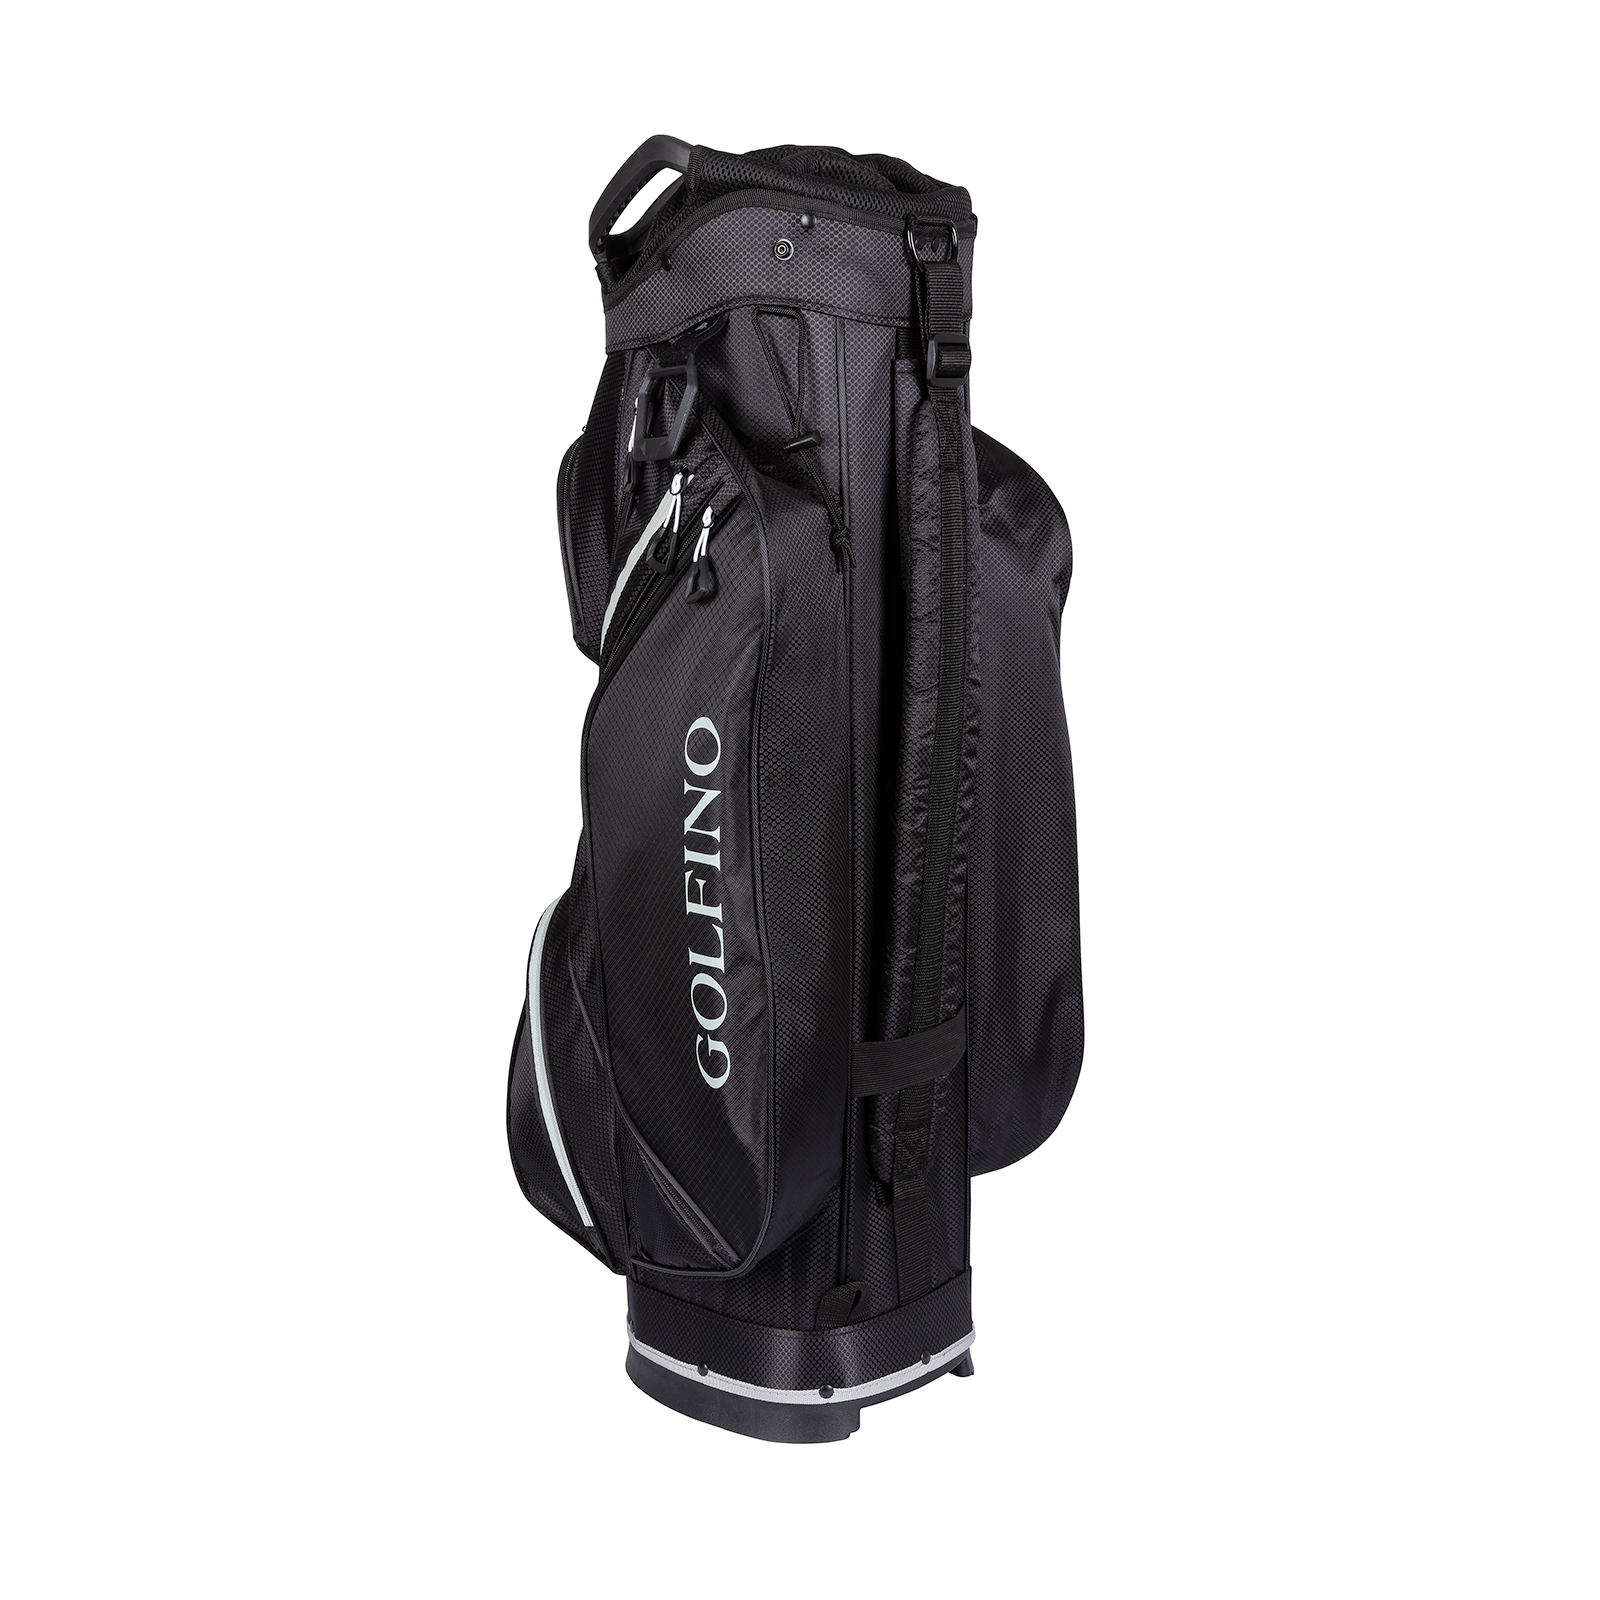 Cart bag with a sporty design